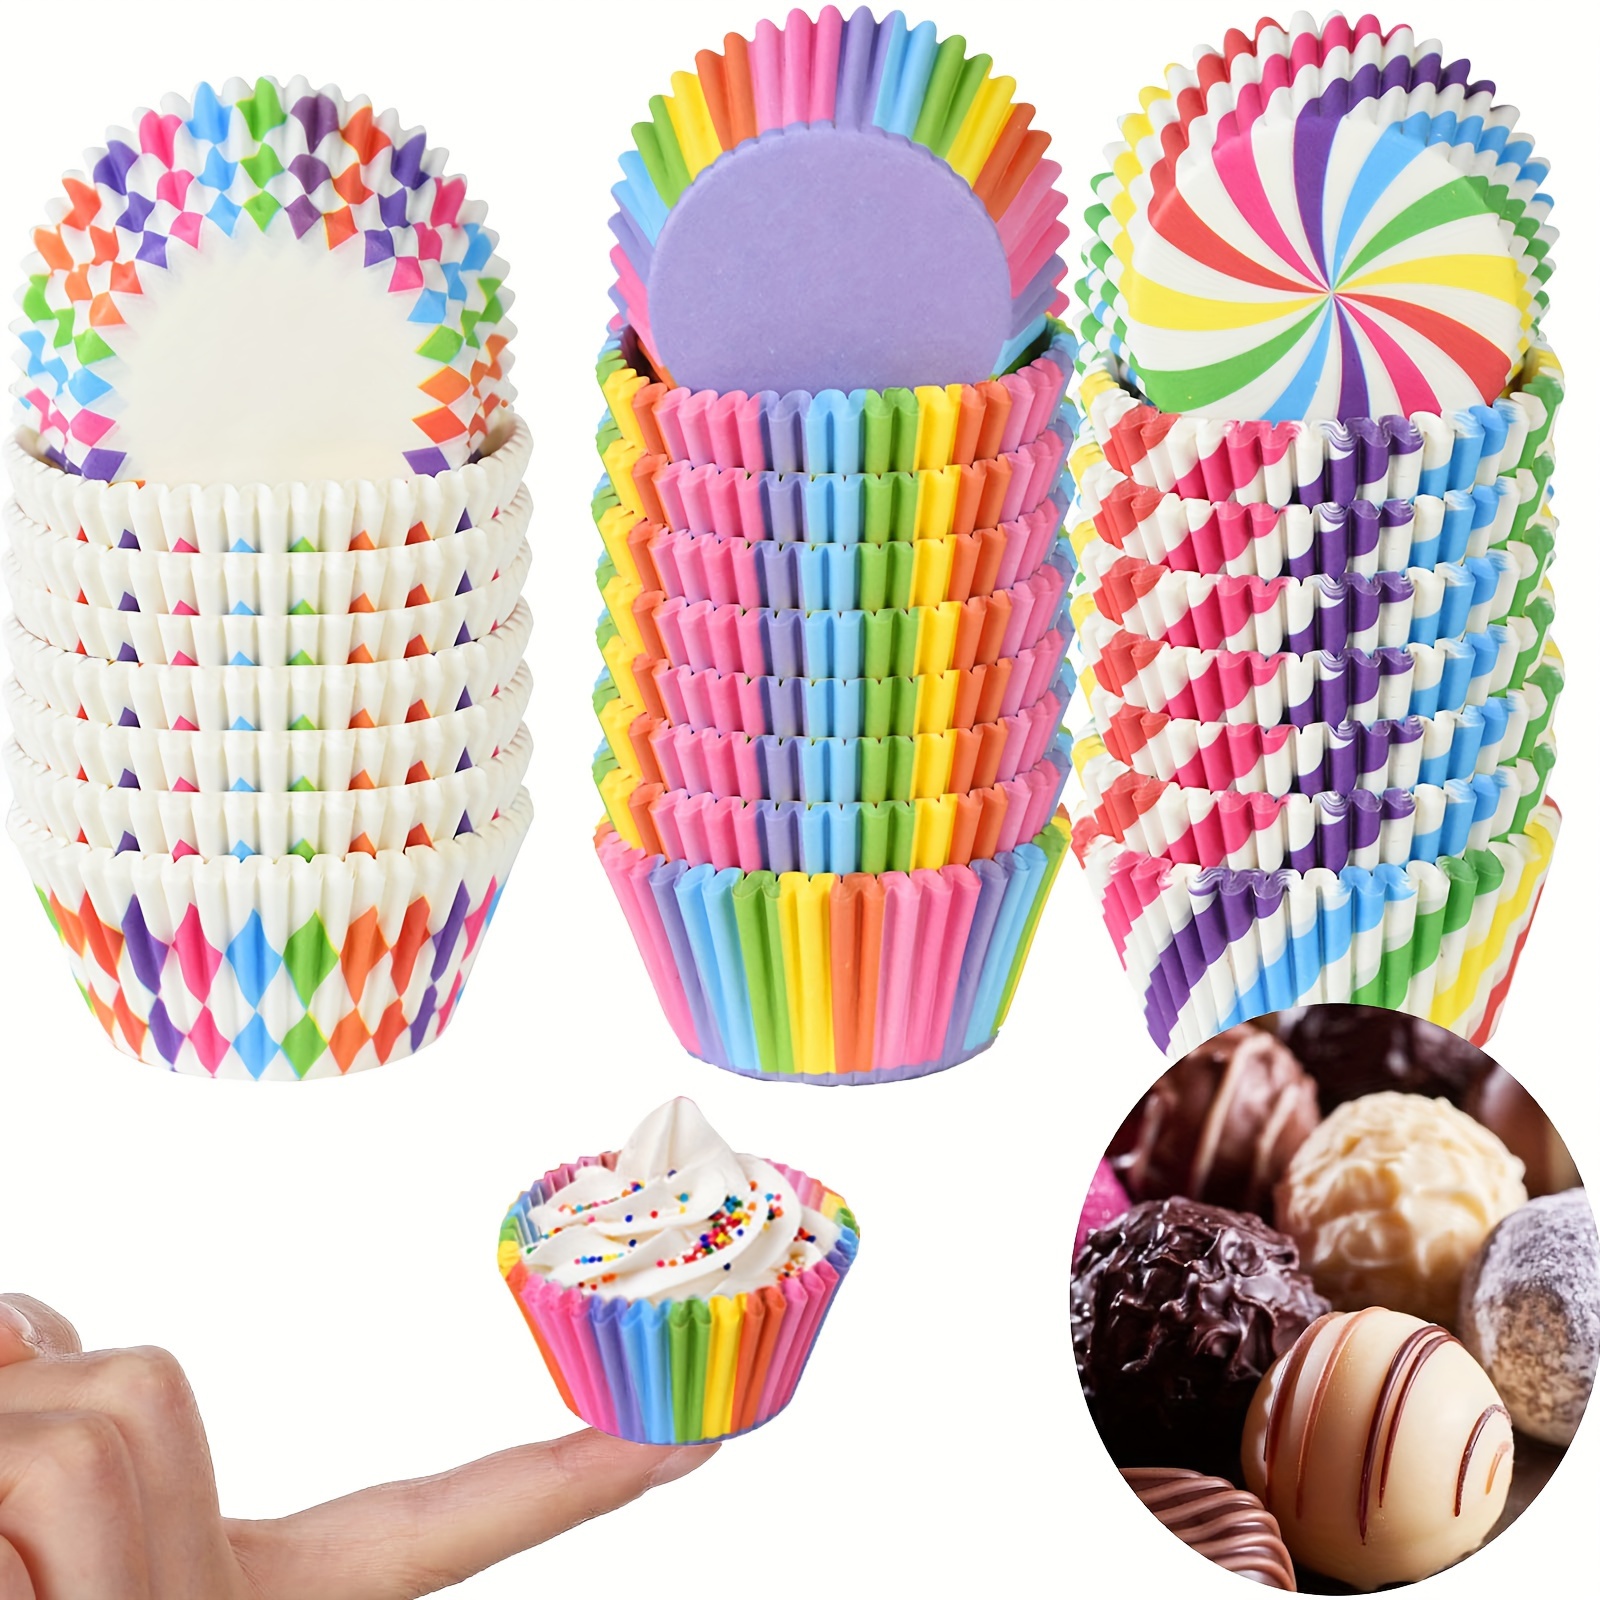 

100/200pcs, Cupcake Baking Cups, Muffin Cupcake Liners Candy Cup, Mini Colorful Cupcake Wrappers, Rainbow Combo Disposable Baking Cups Set For Birthday Party Wedding Cake Paper Cup Greaseproof Paper